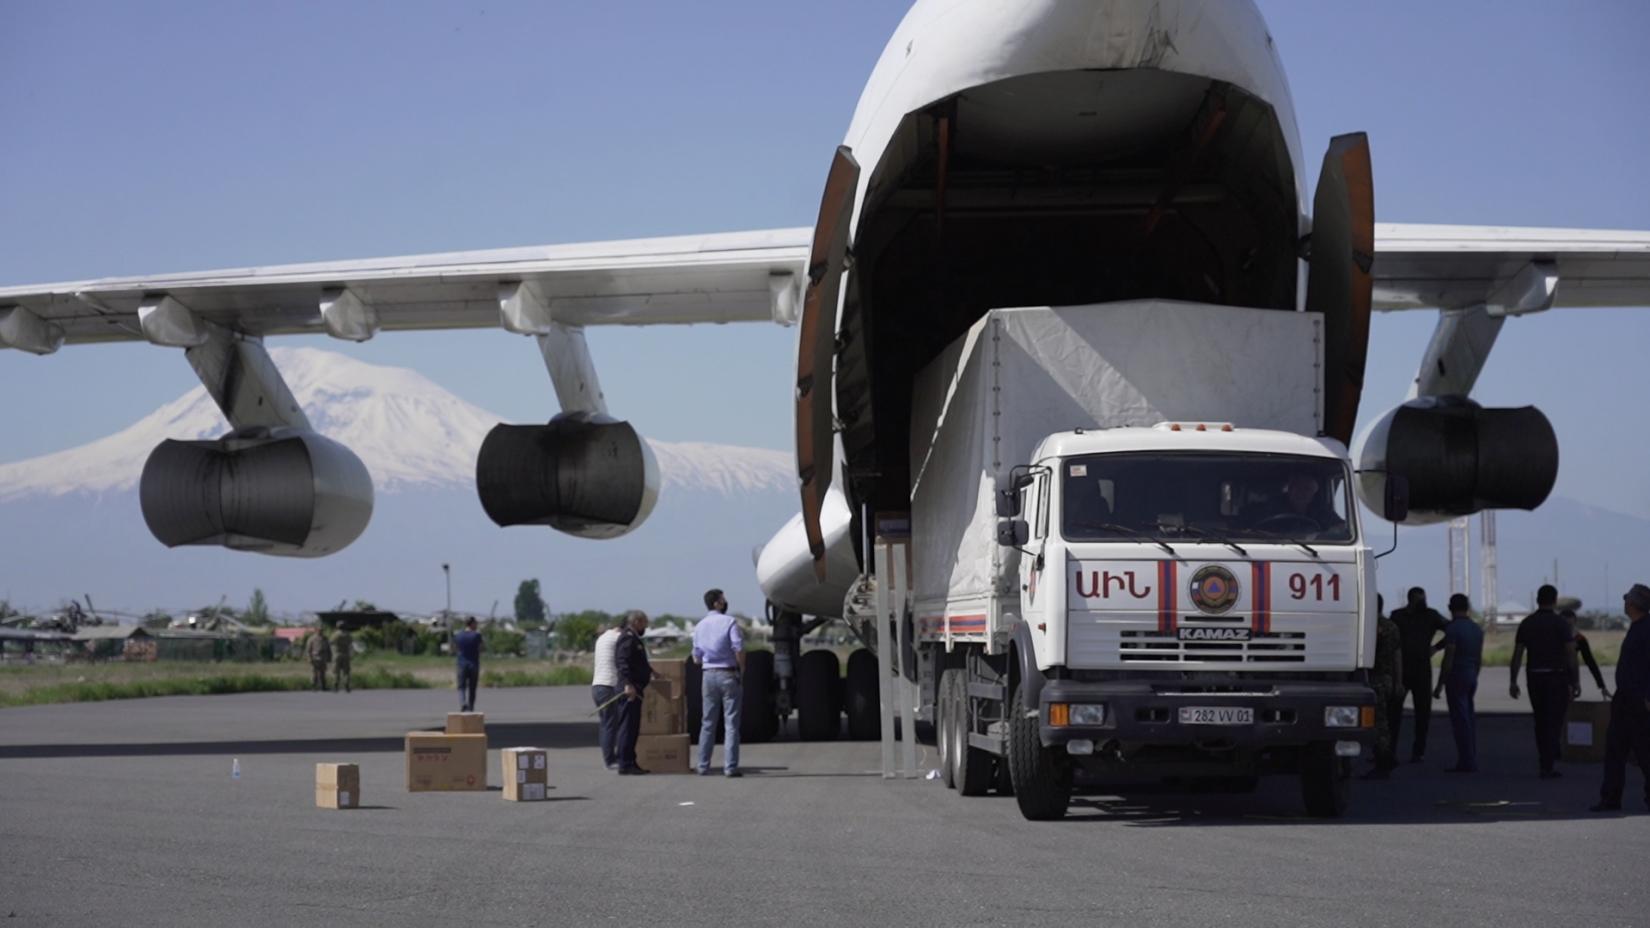 Тhe delivered assistance is unloaded from the plane into the trucks of the Ministry of Emergency Situations.